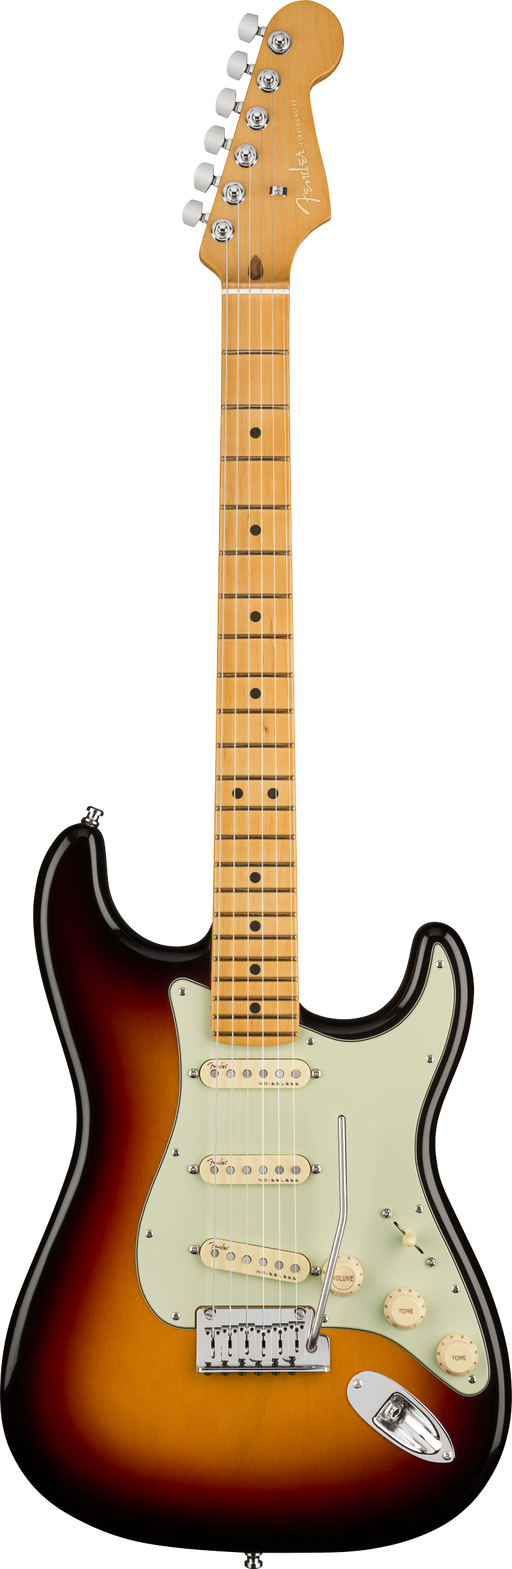 Fender American Ultra Stratocaster Maple Fingerboard Ultraburst Electric Guitar With Case